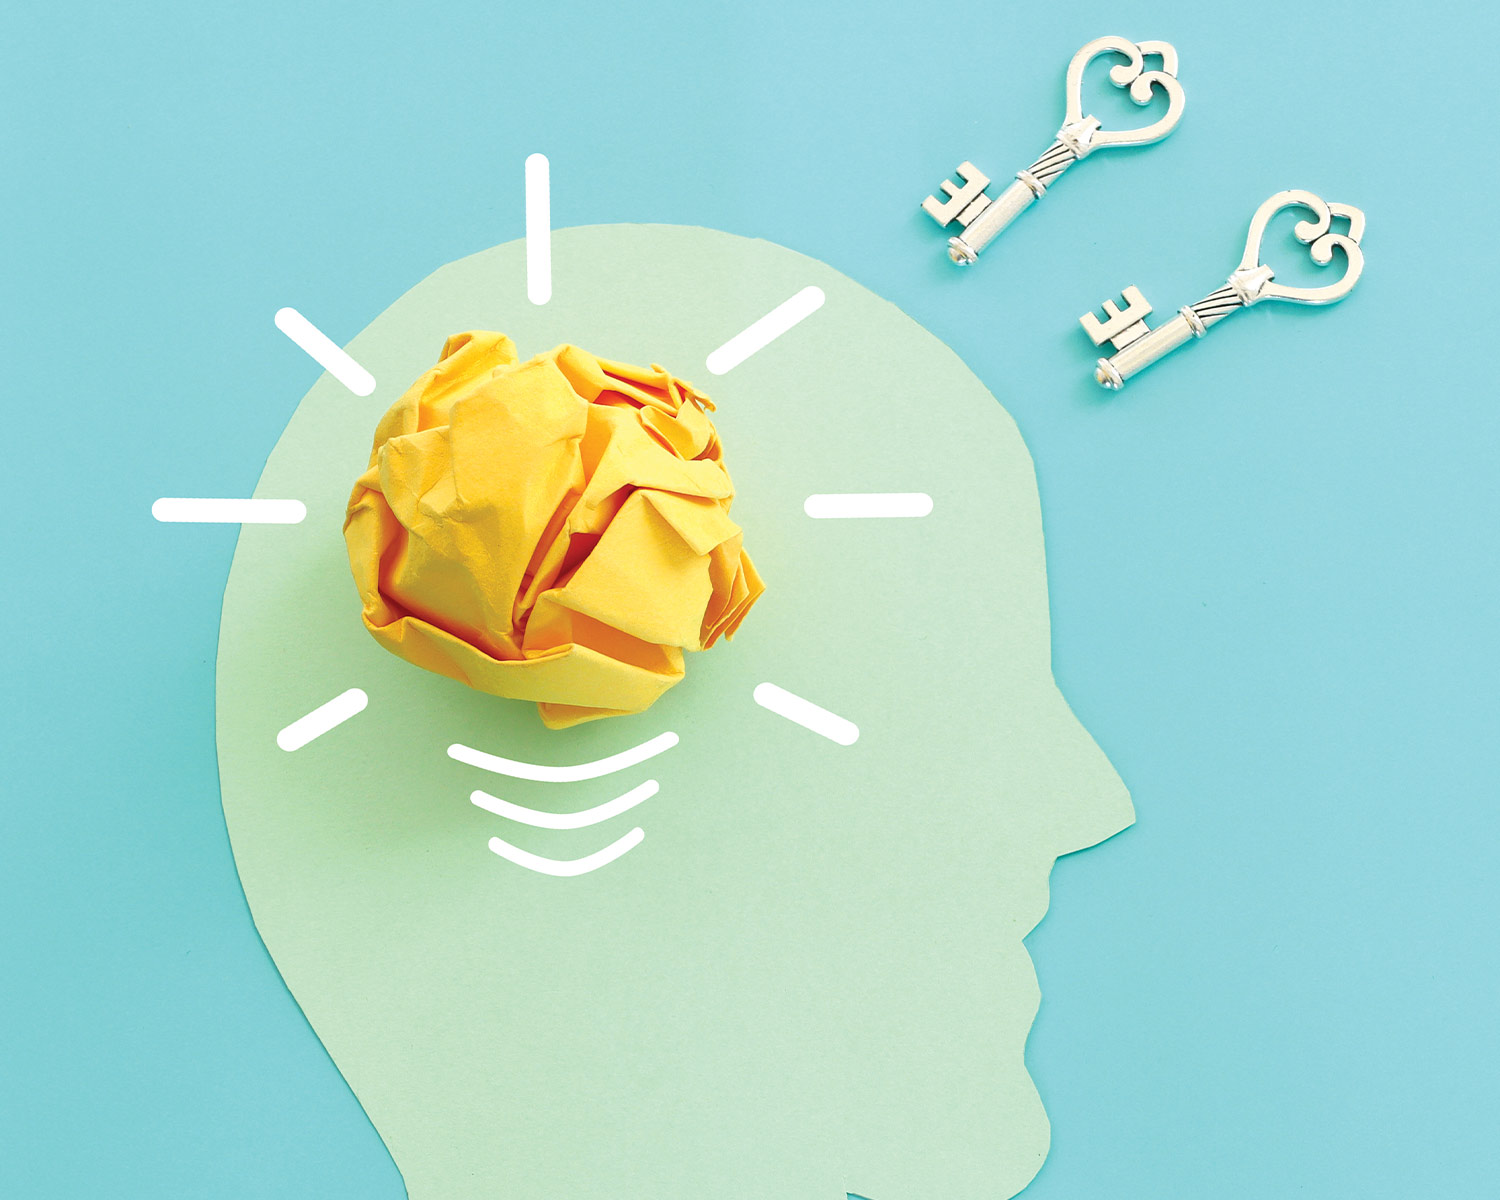 a paper art graphic of a light green human profile with a bright yellow ball of paper for as an active brain and keys floating just outside the profile